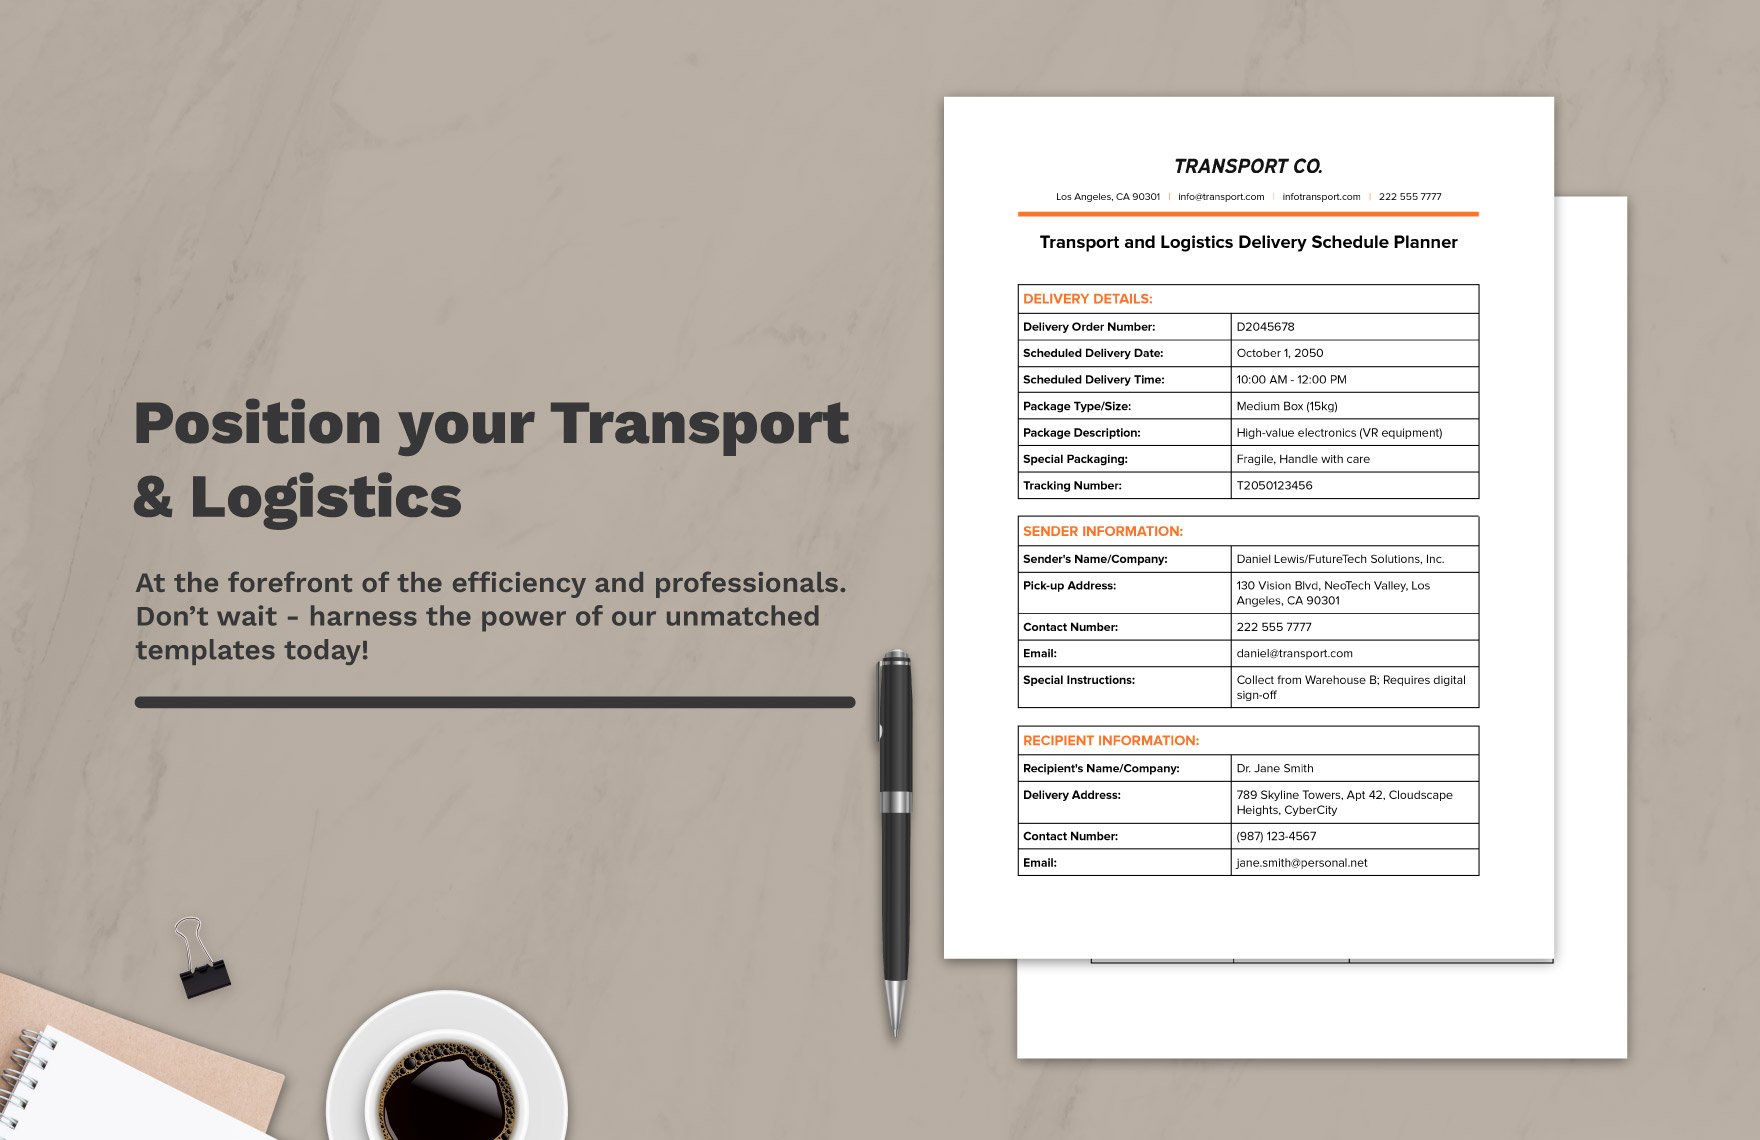 Transport and Logistics Delivery Schedule Planner Template